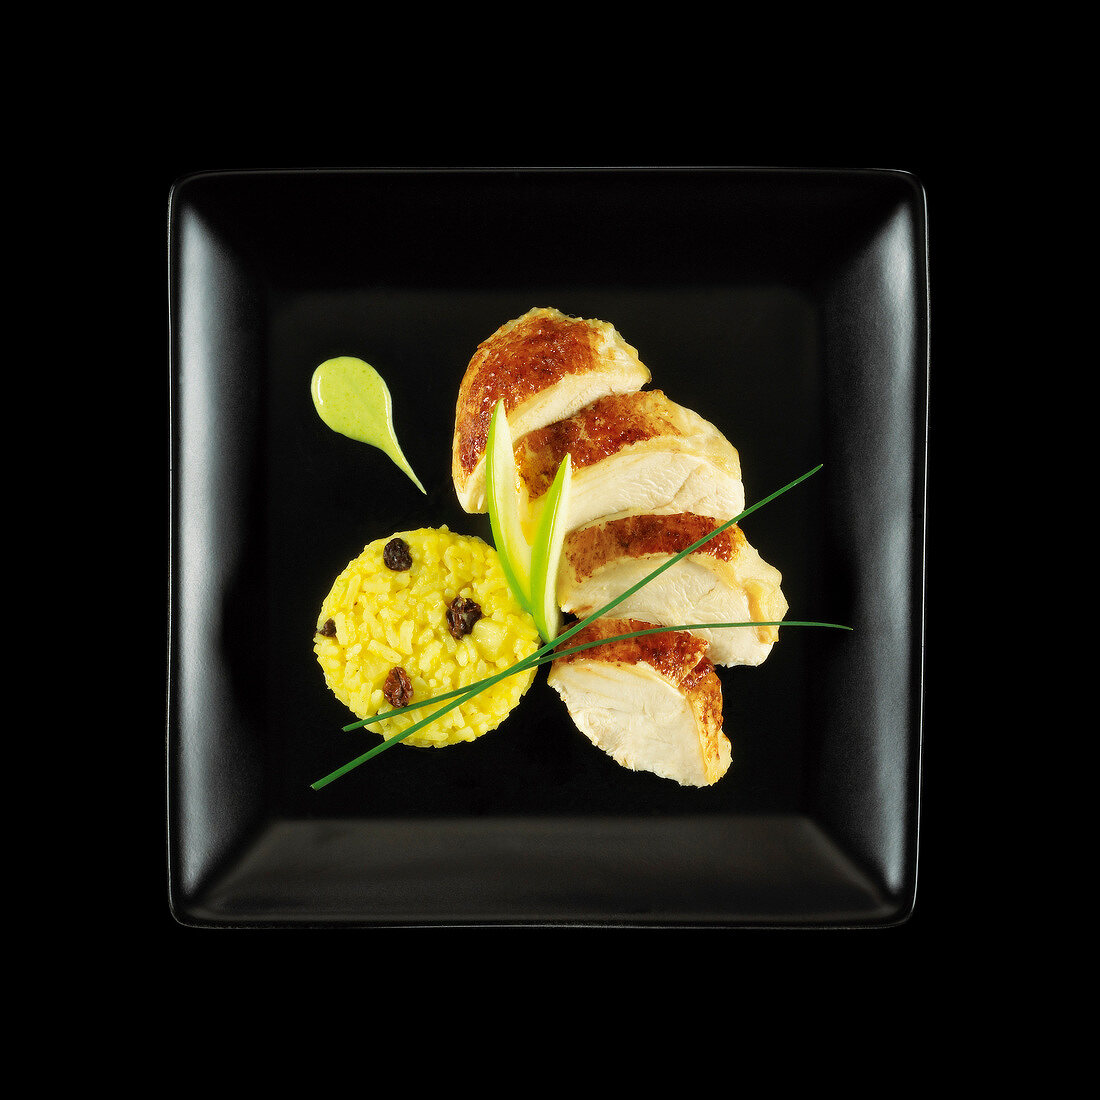 Sliced chicken breast,green apple and saffron rice on a black background